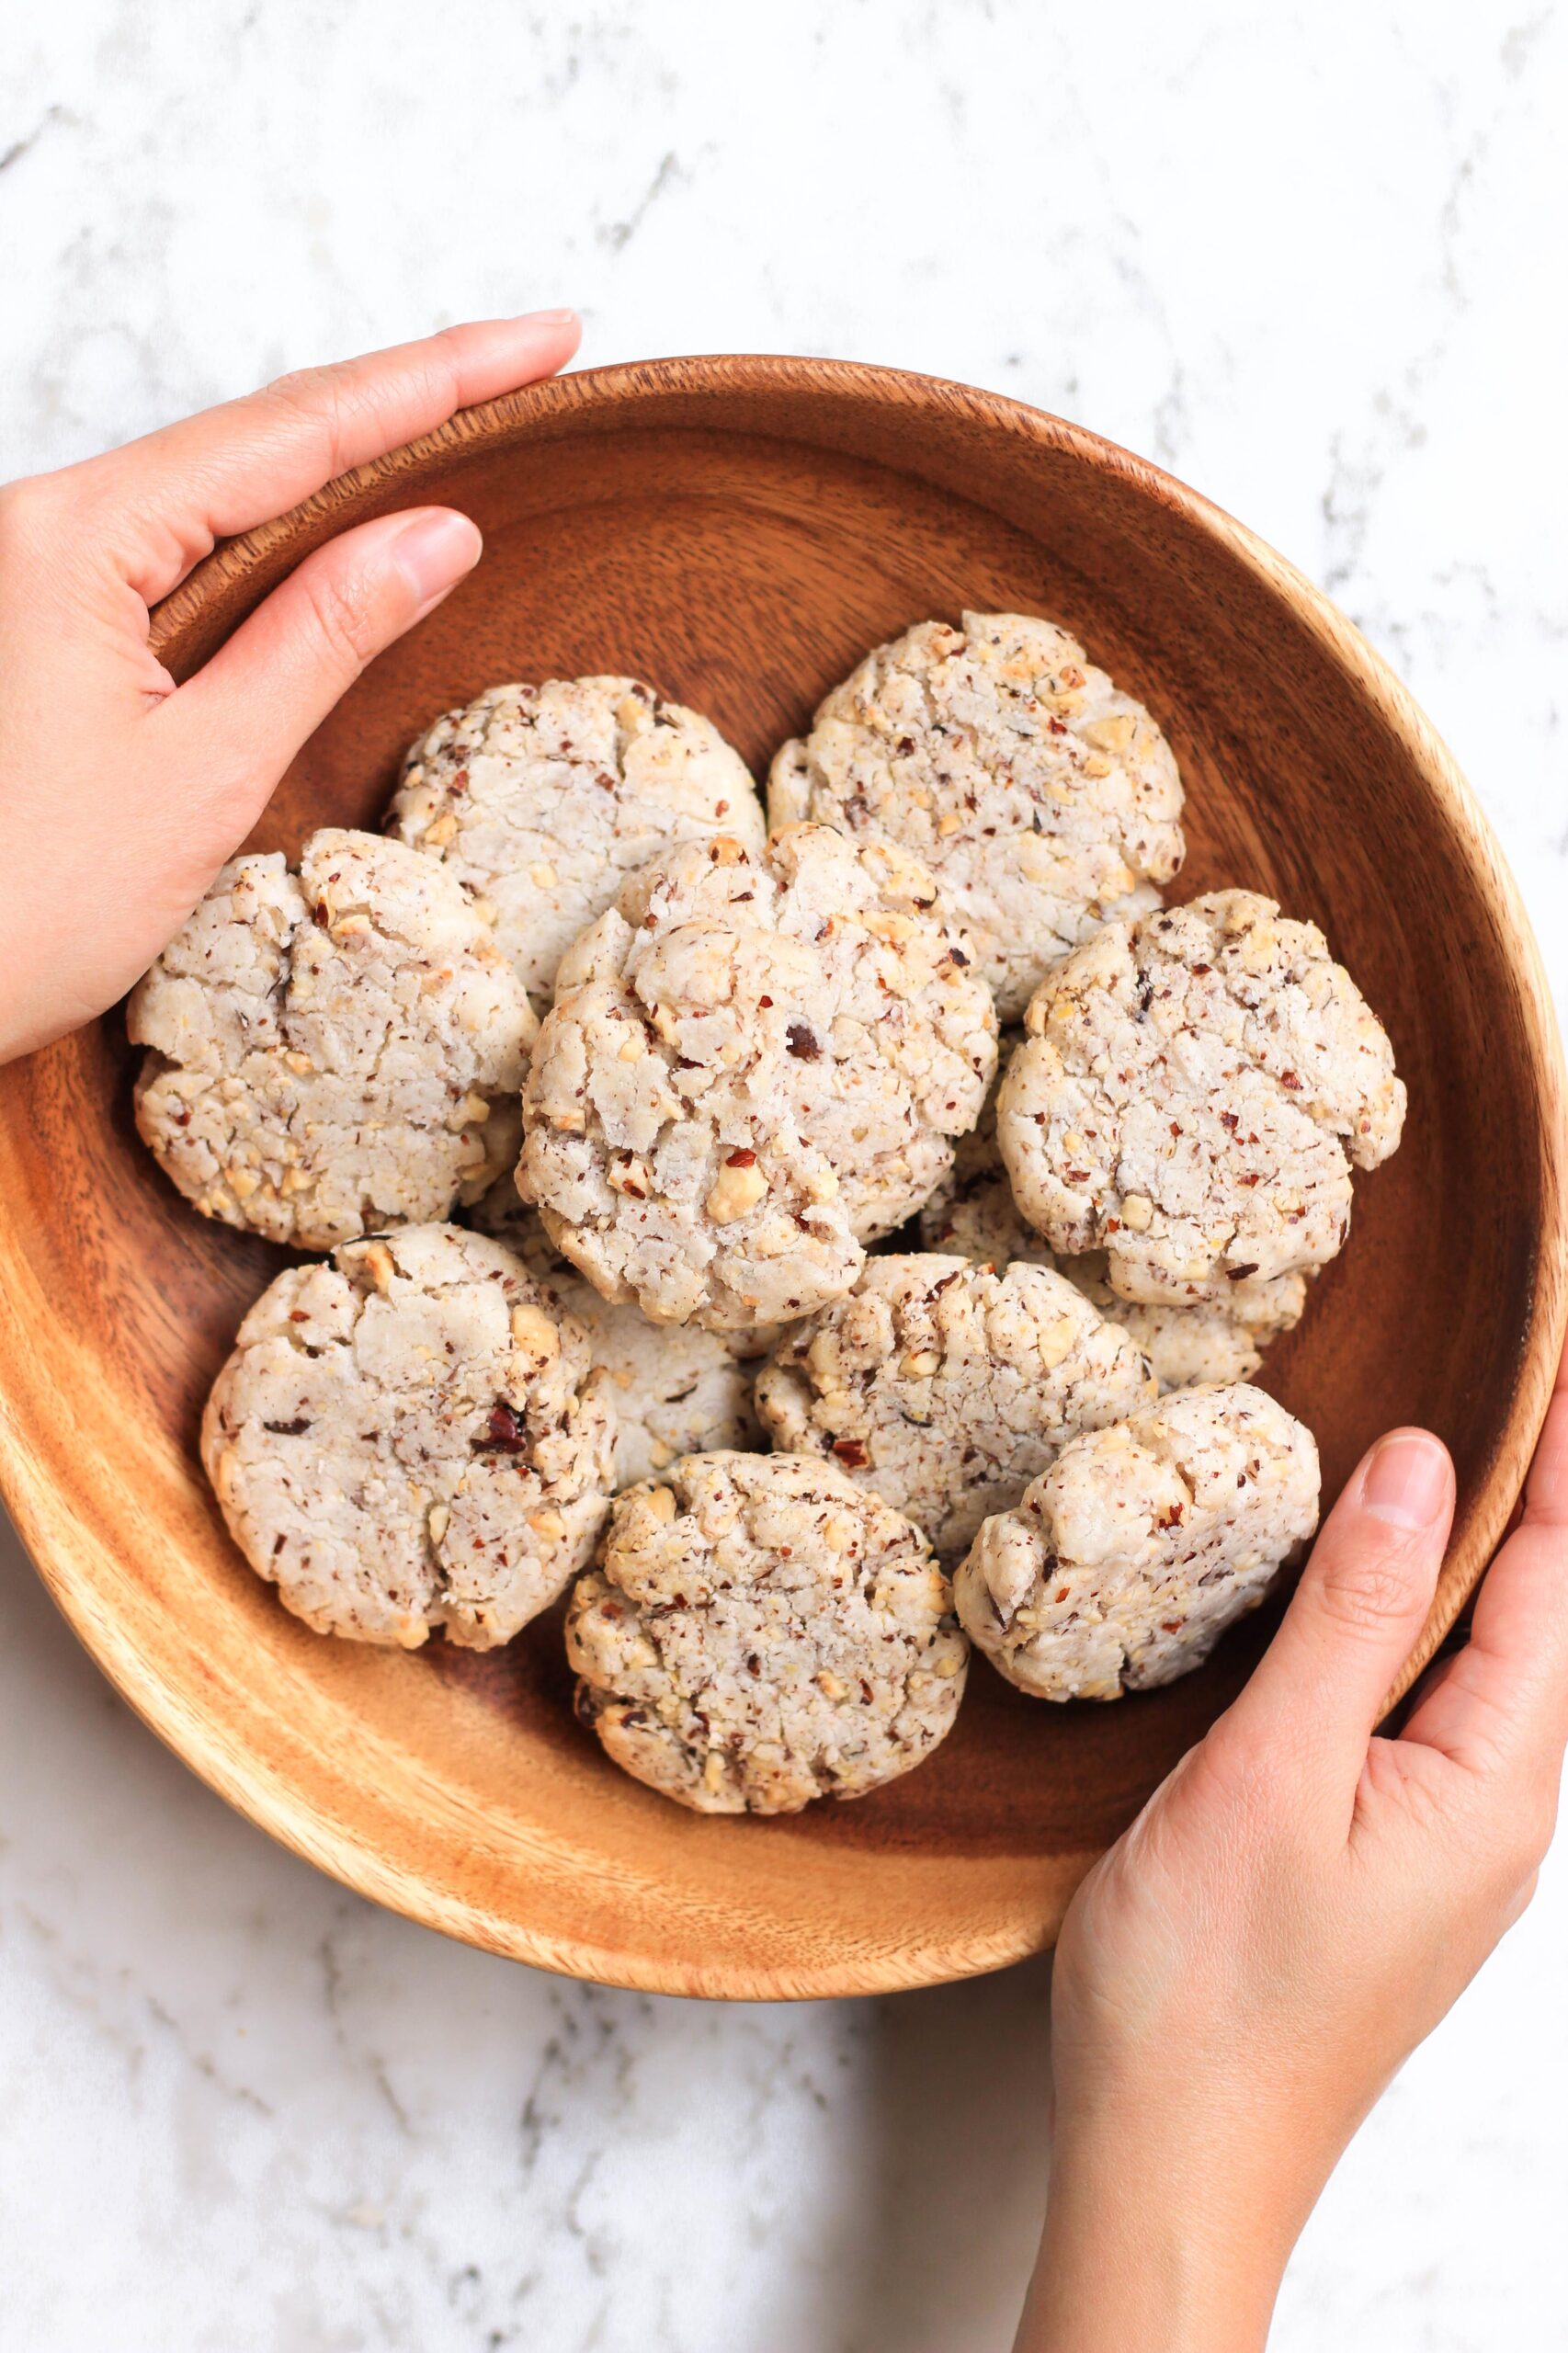  These cookies are perfect for those with gluten sensitivities.